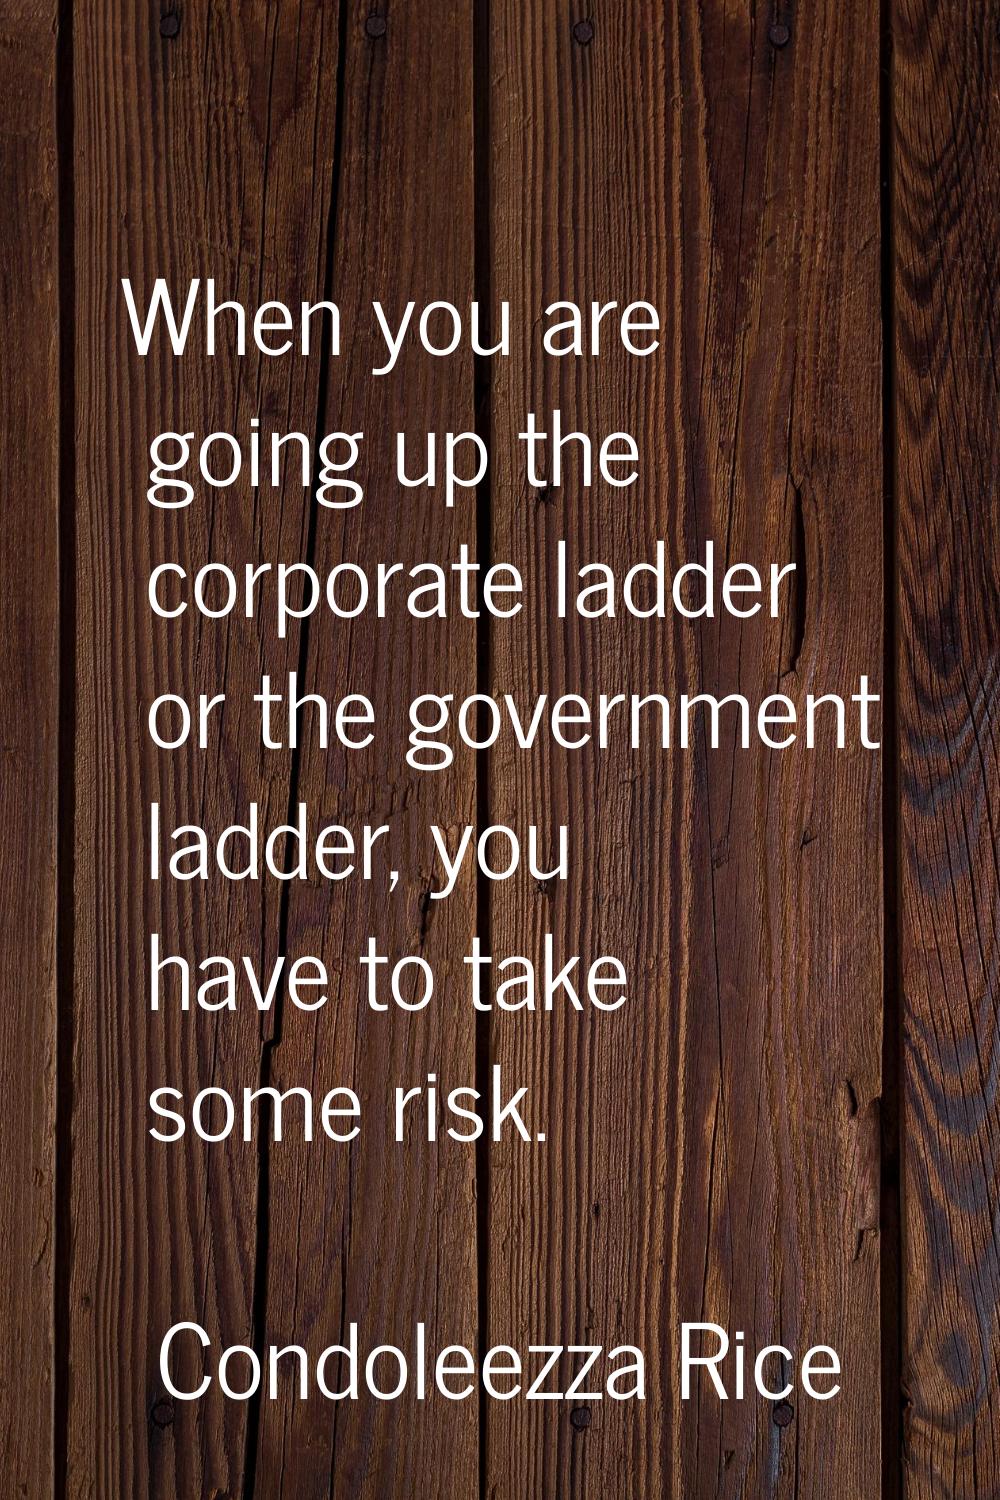 When you are going up the corporate ladder or the government ladder, you have to take some risk.